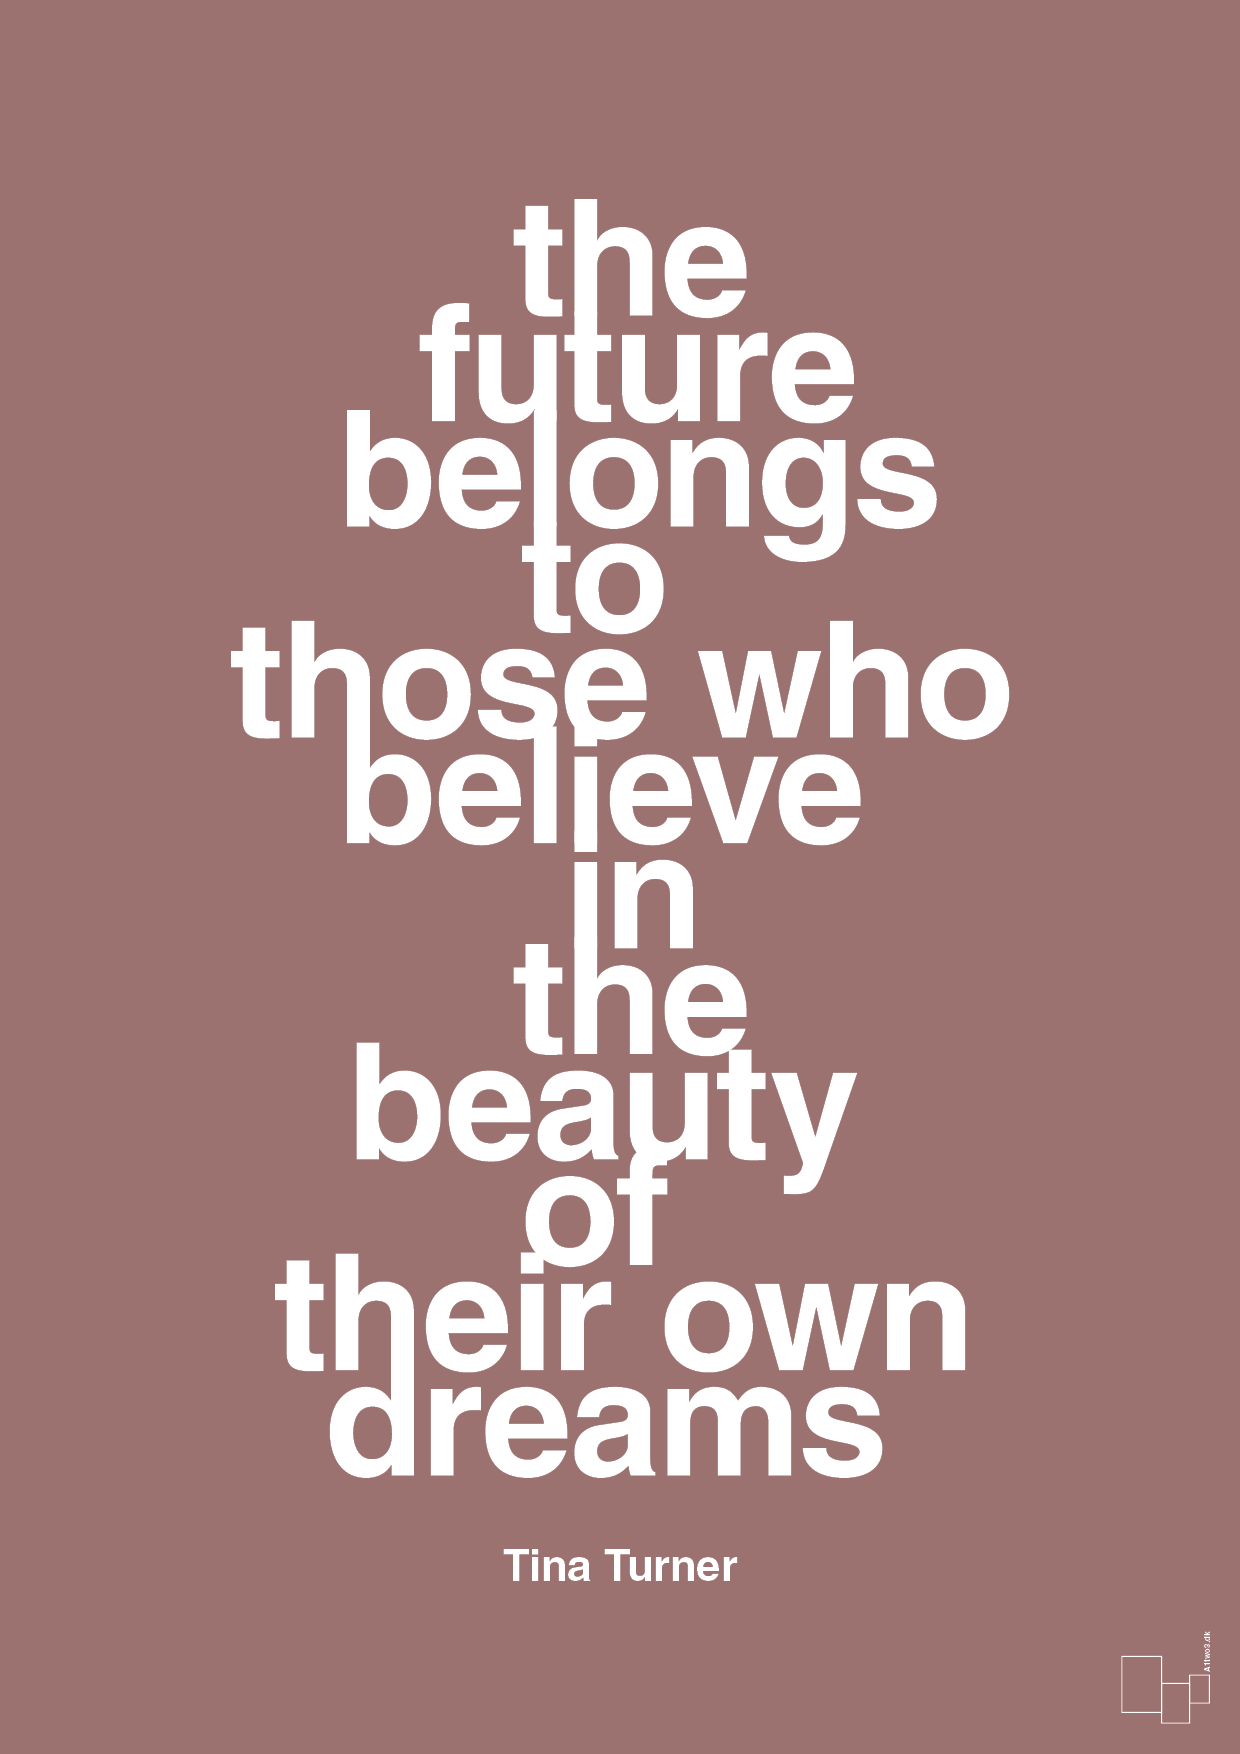 the future belongs to those who believe in the beauty of their own dreams - Plakat med Citater i Plum